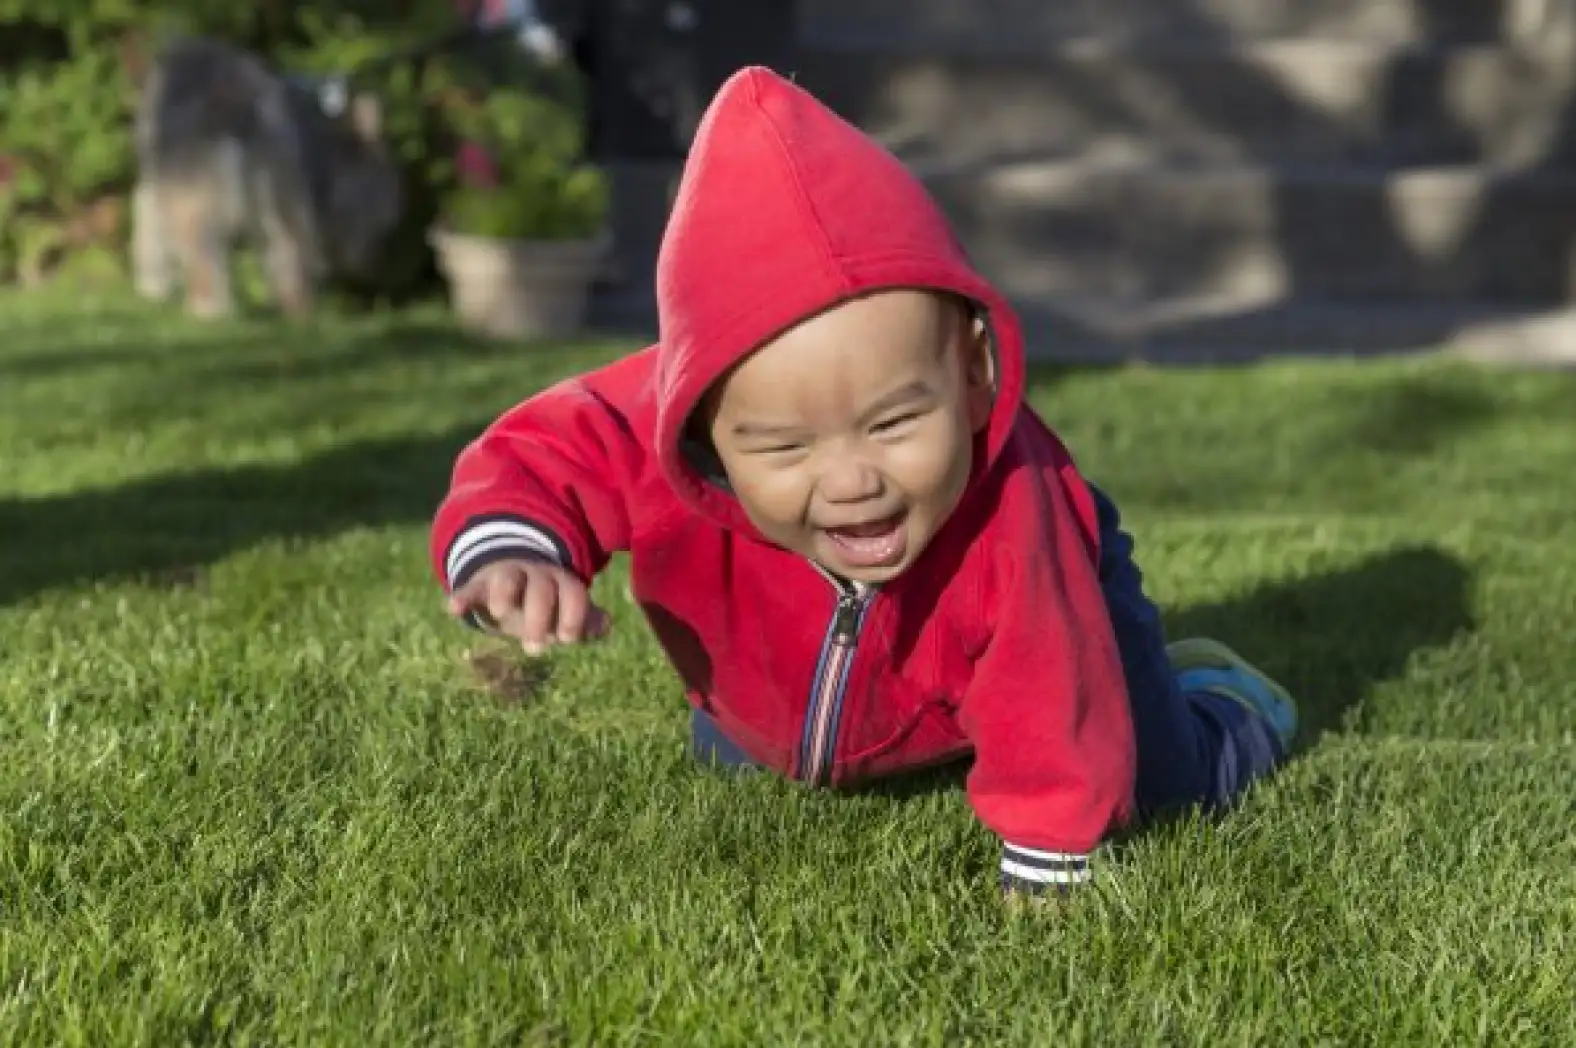 A baby crawls across the grass, smiling